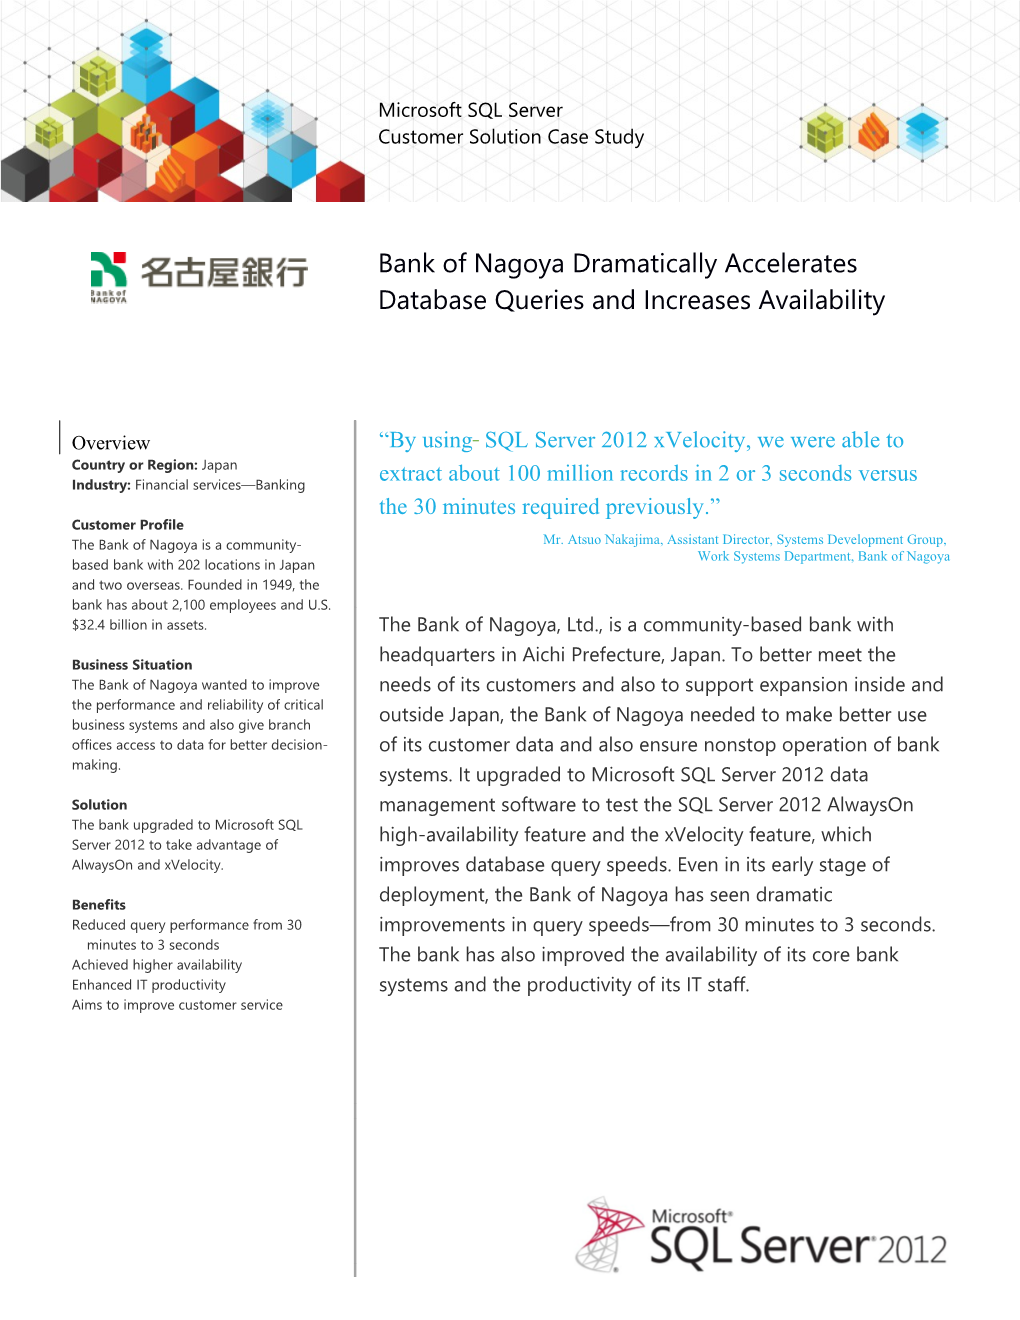 Bank of Nagoya Dramatically Accelerates Database Queries and Increases Availability